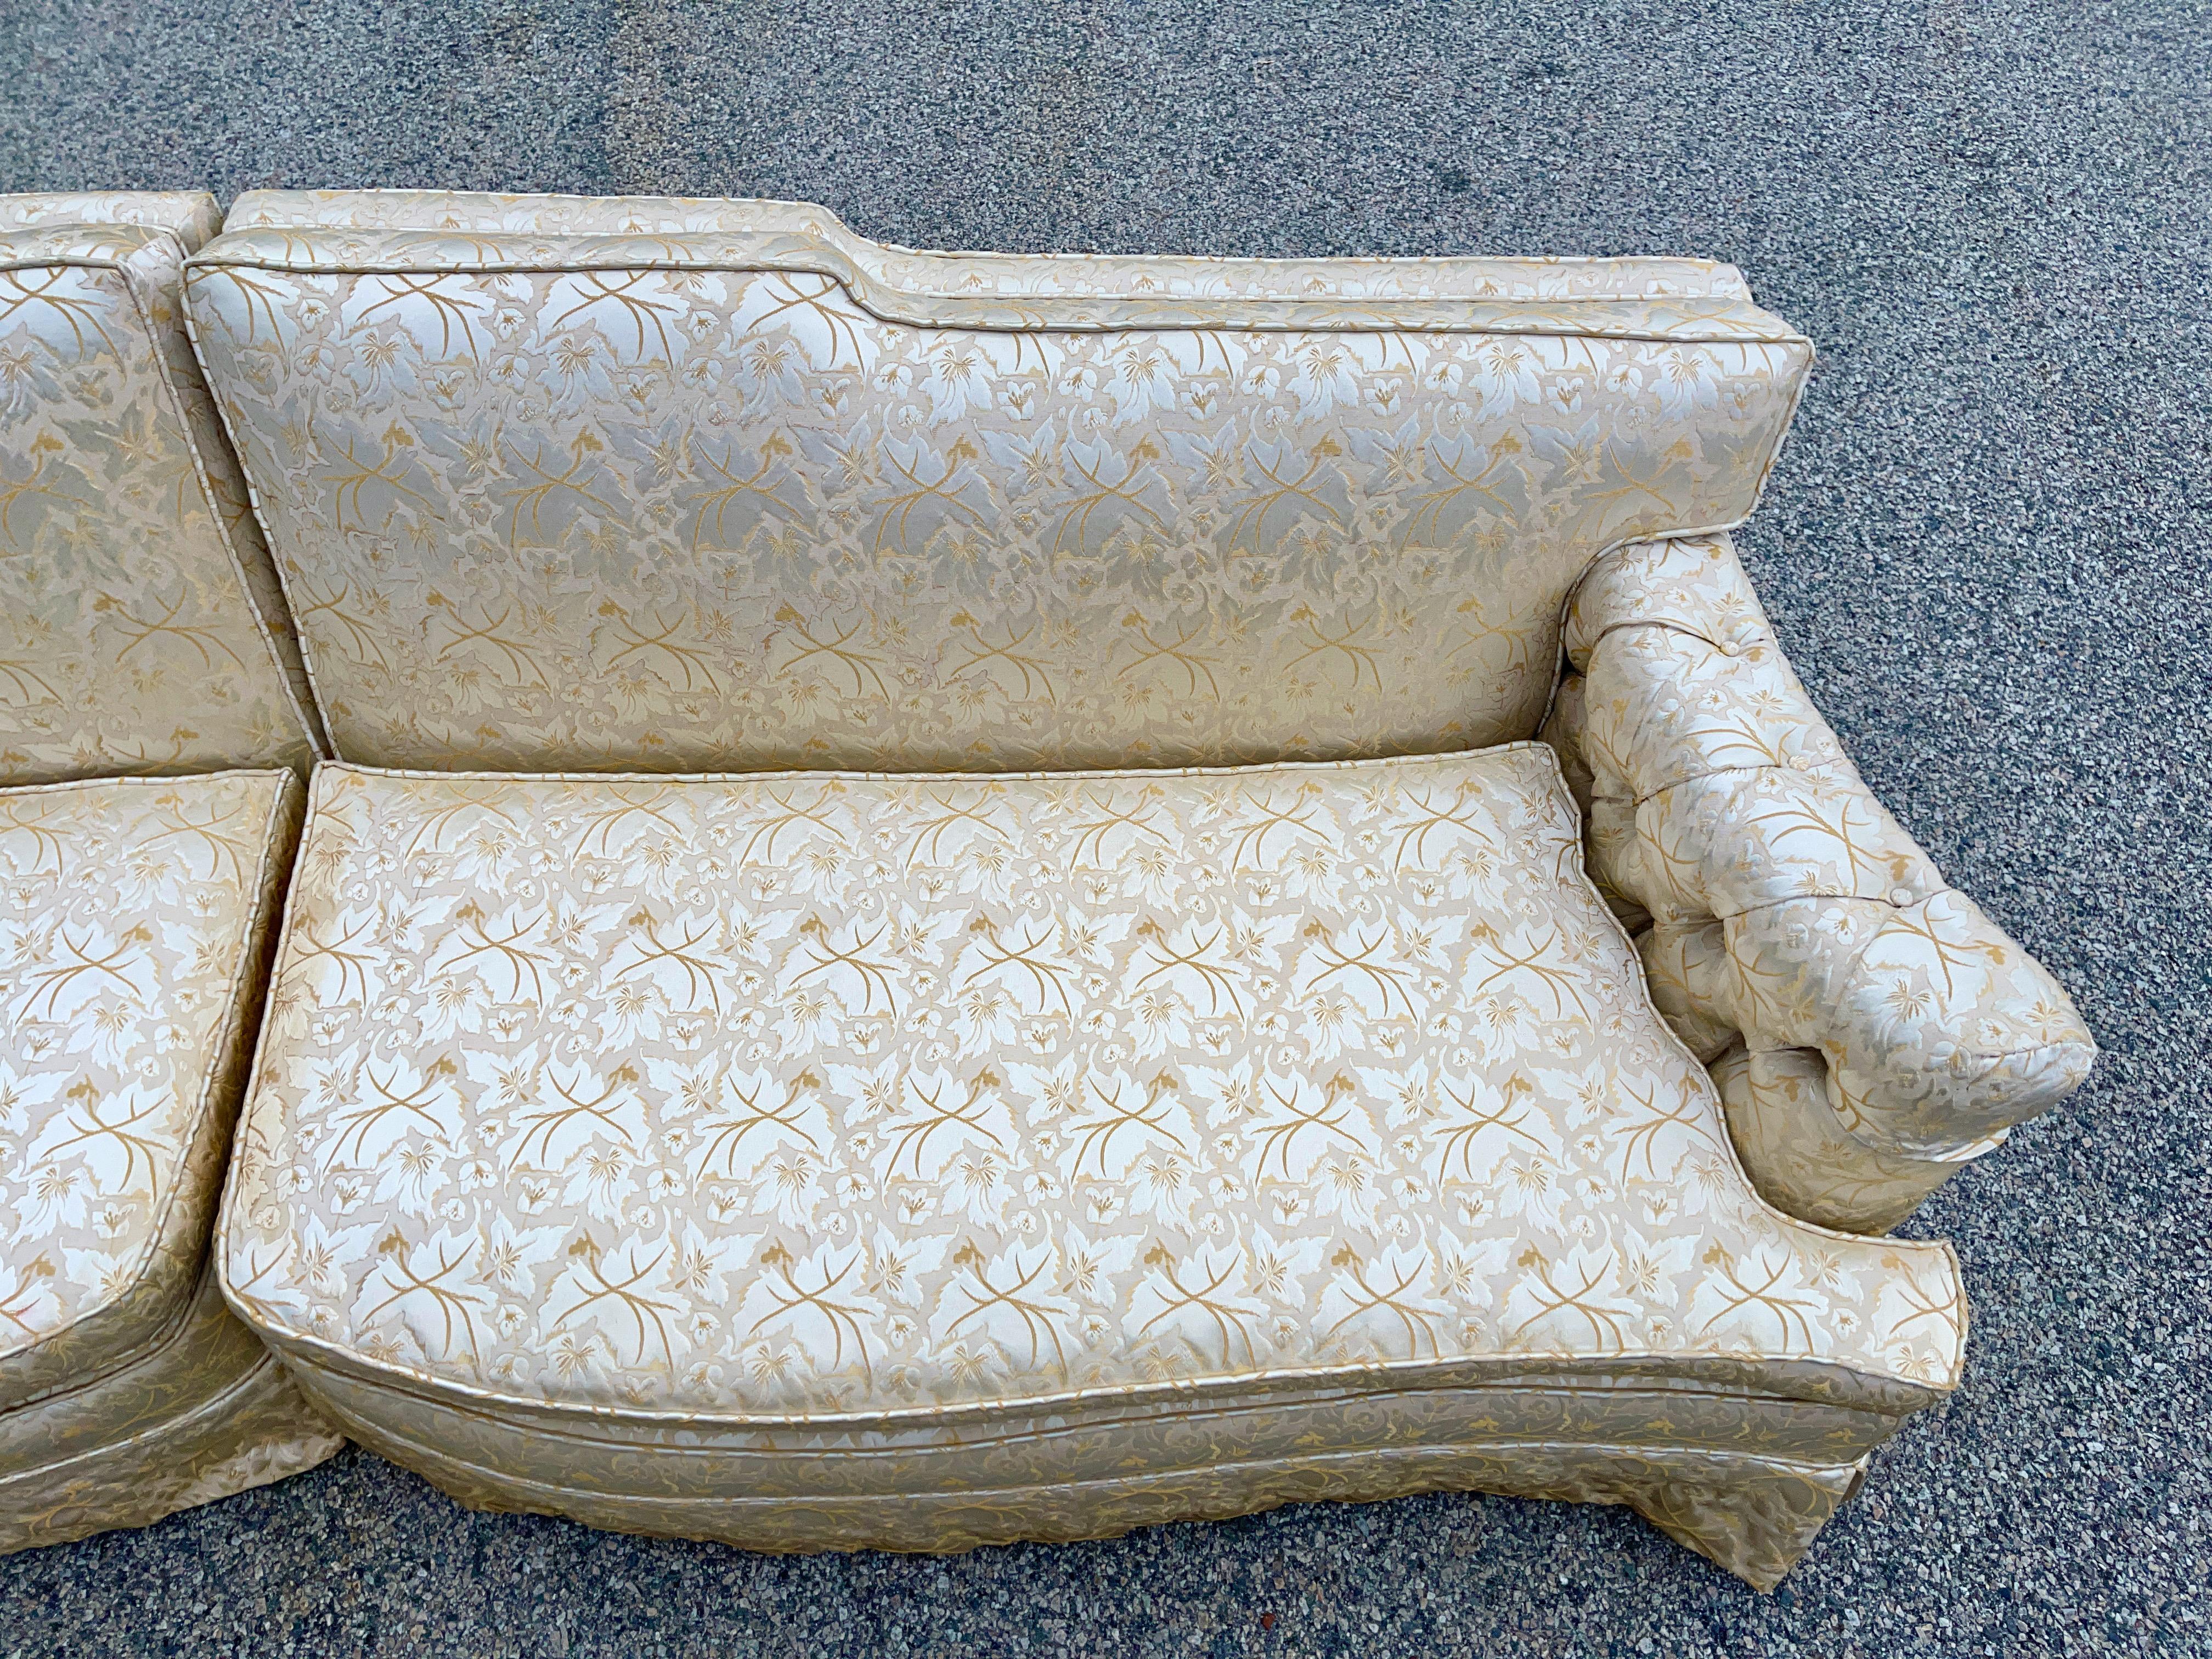 Hollywood Regency Split Sofa In Good Condition For Sale In Hanover, MA